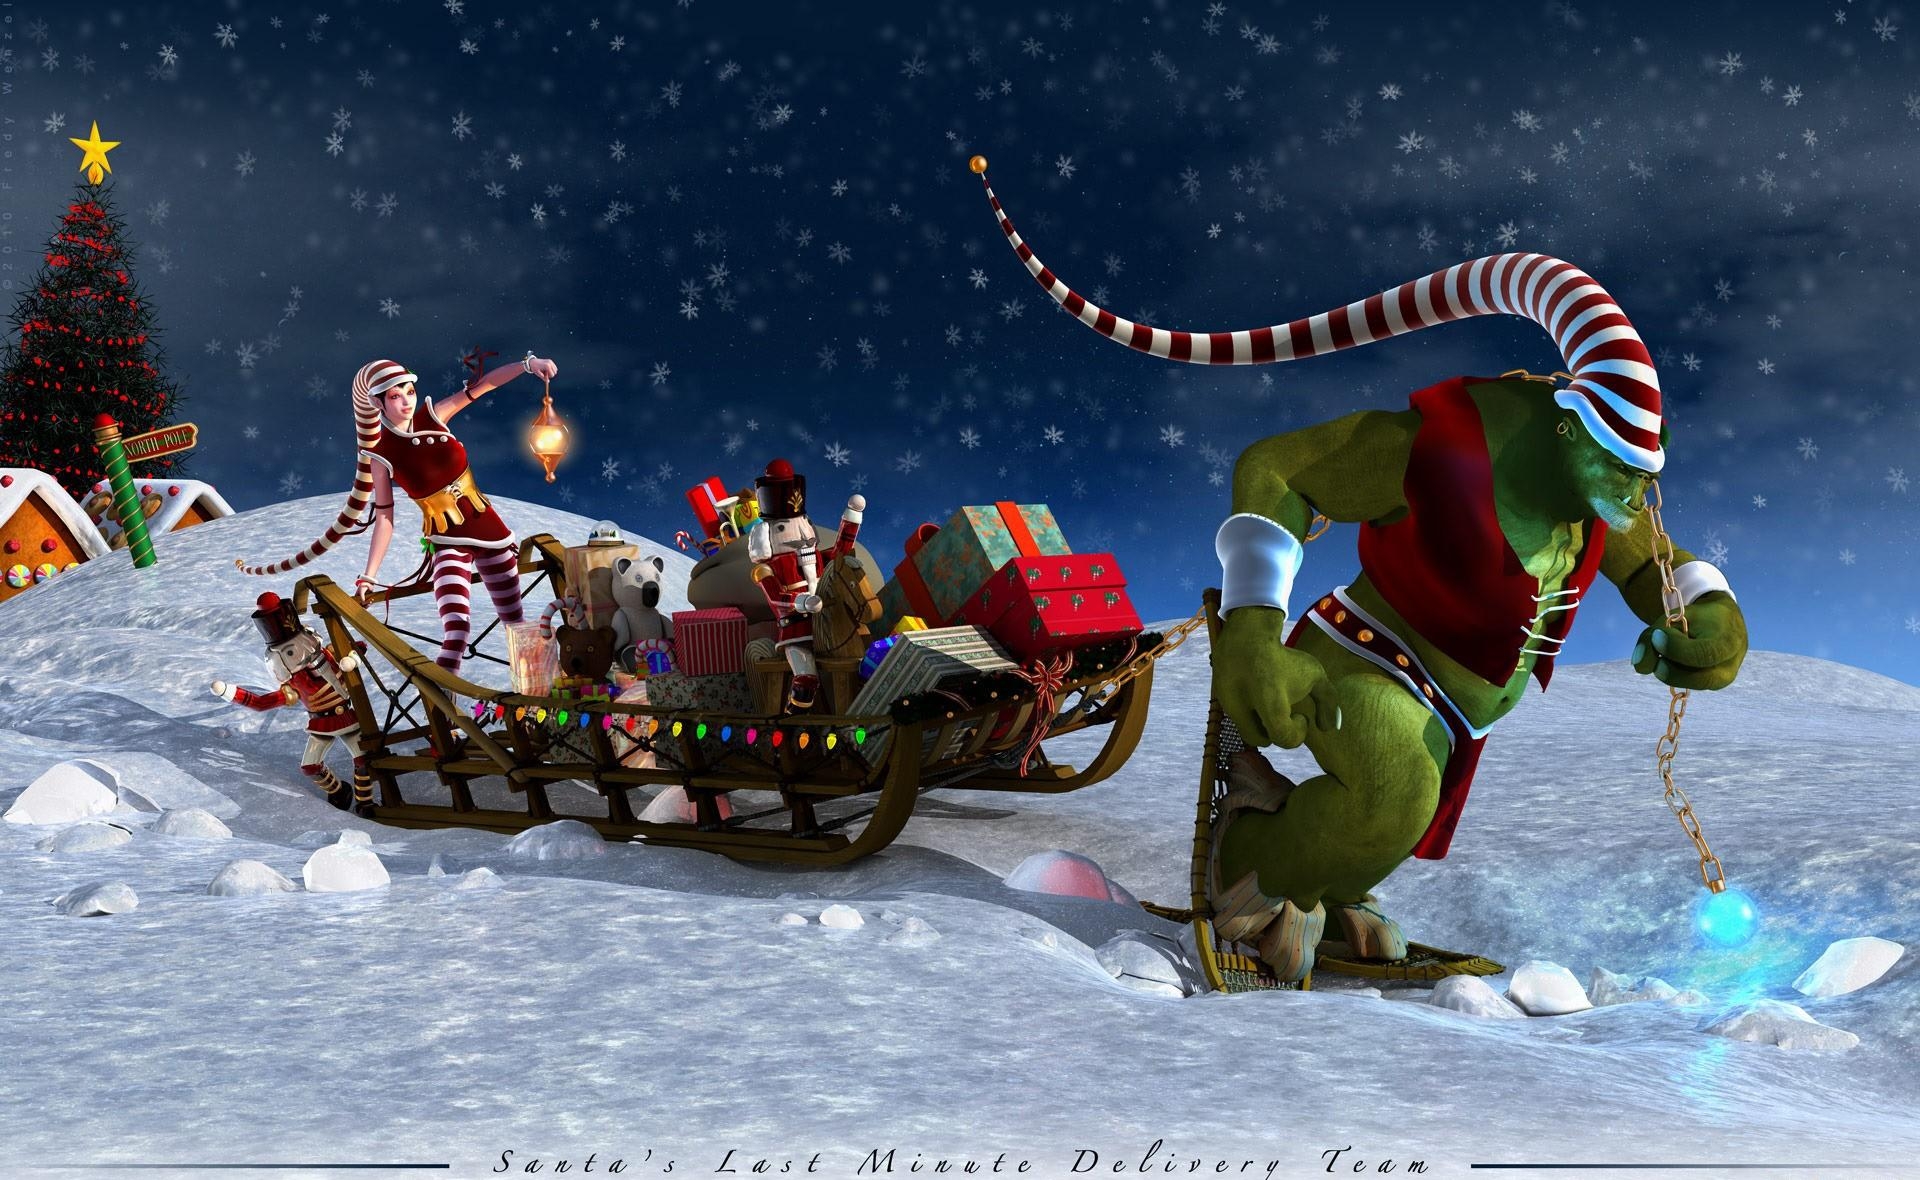 holidays, night, christmas, inscription, sleigh, sledge, presents, gifts, helpers, assistants wallpaper for mobile